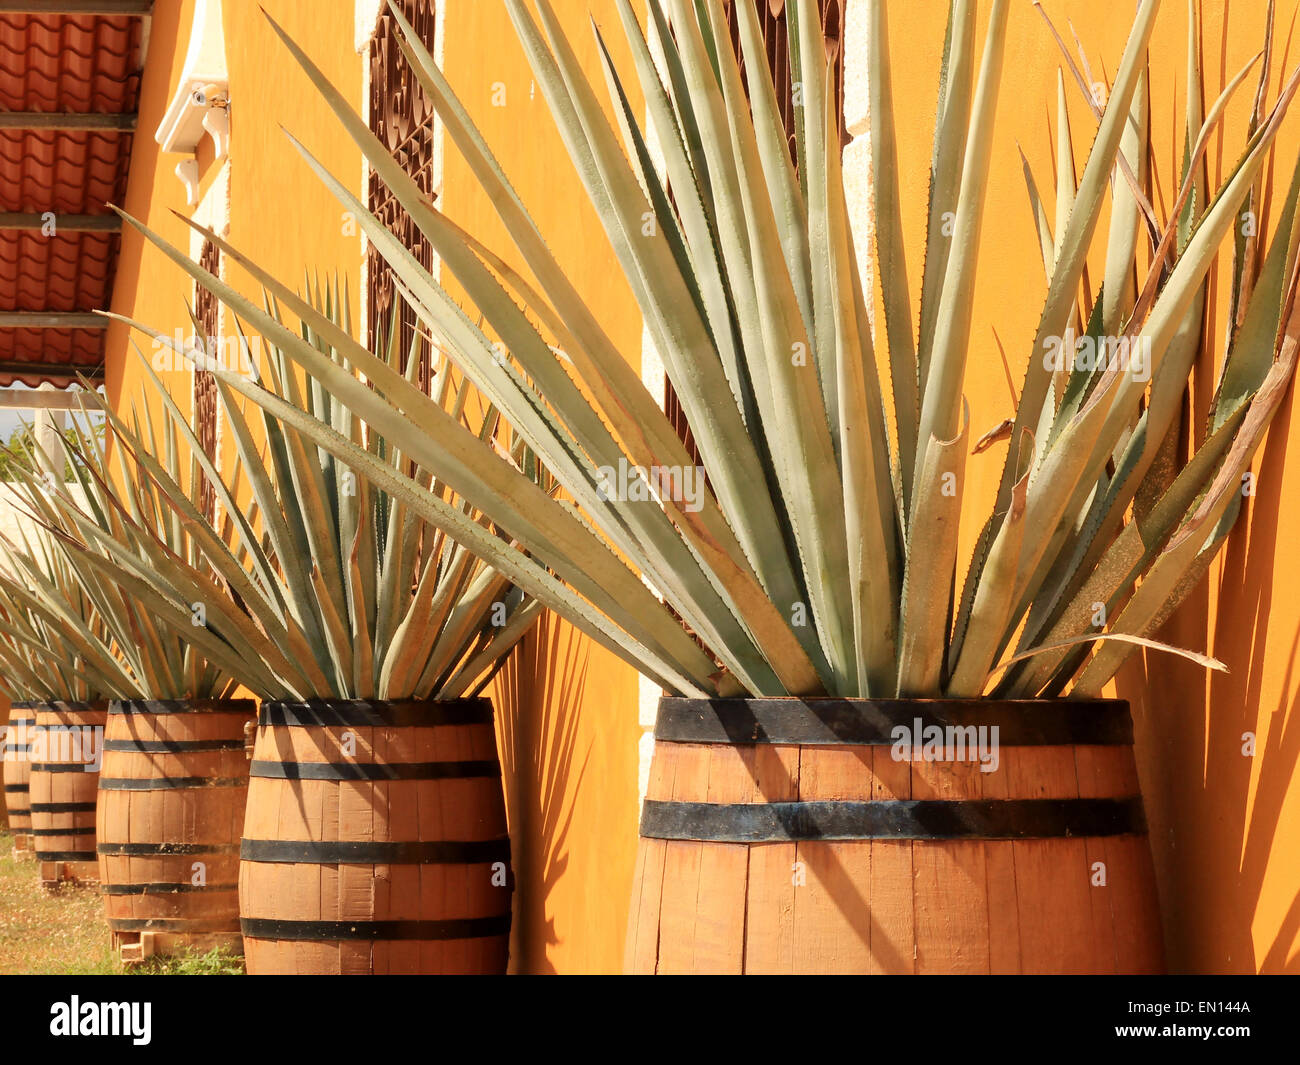 Agave americana ( tequila ingredient ) in solid wooden barrels Stock Photo